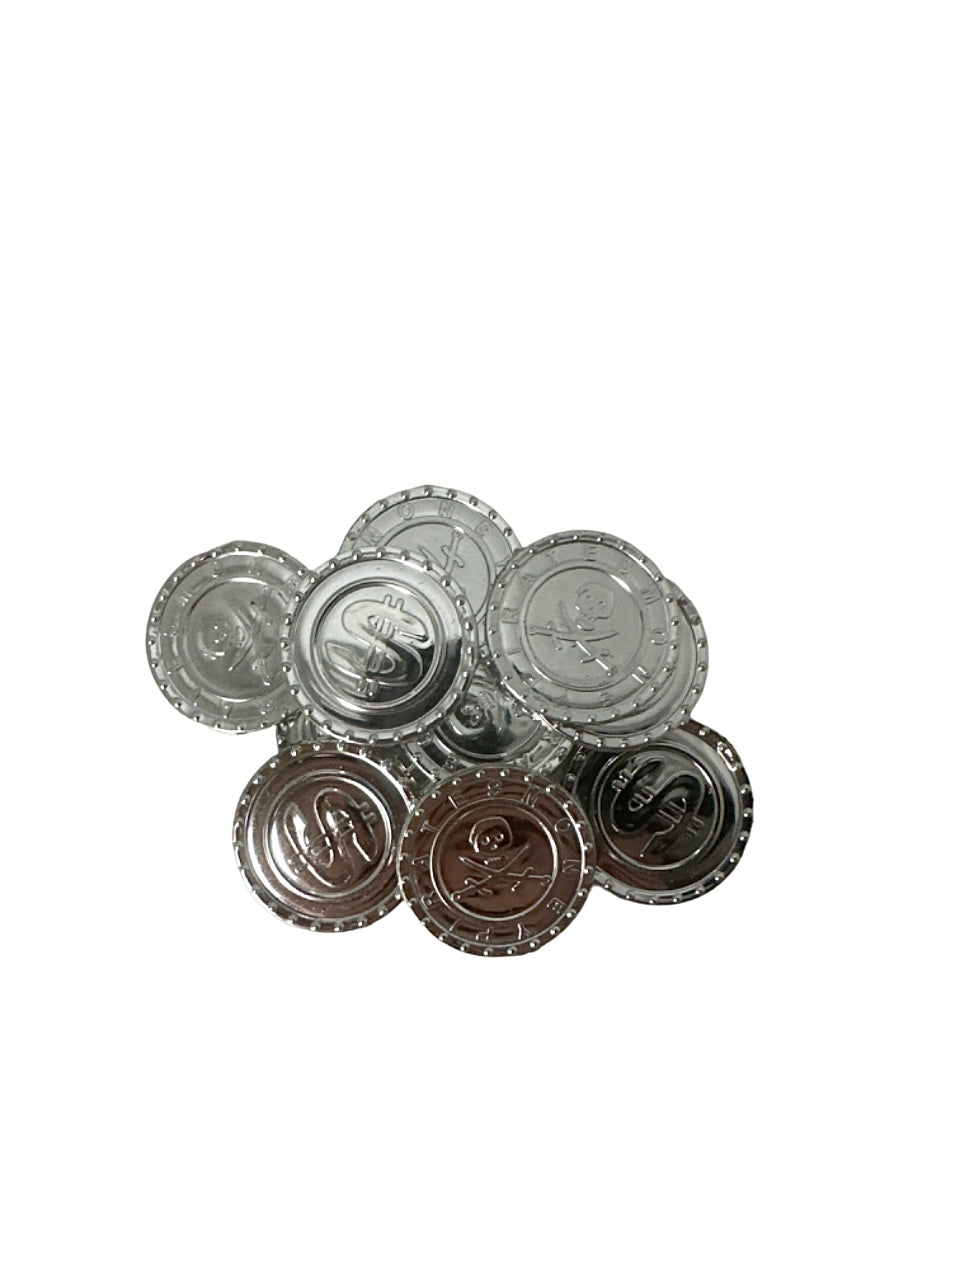 Silver Pirate Coins 100pc